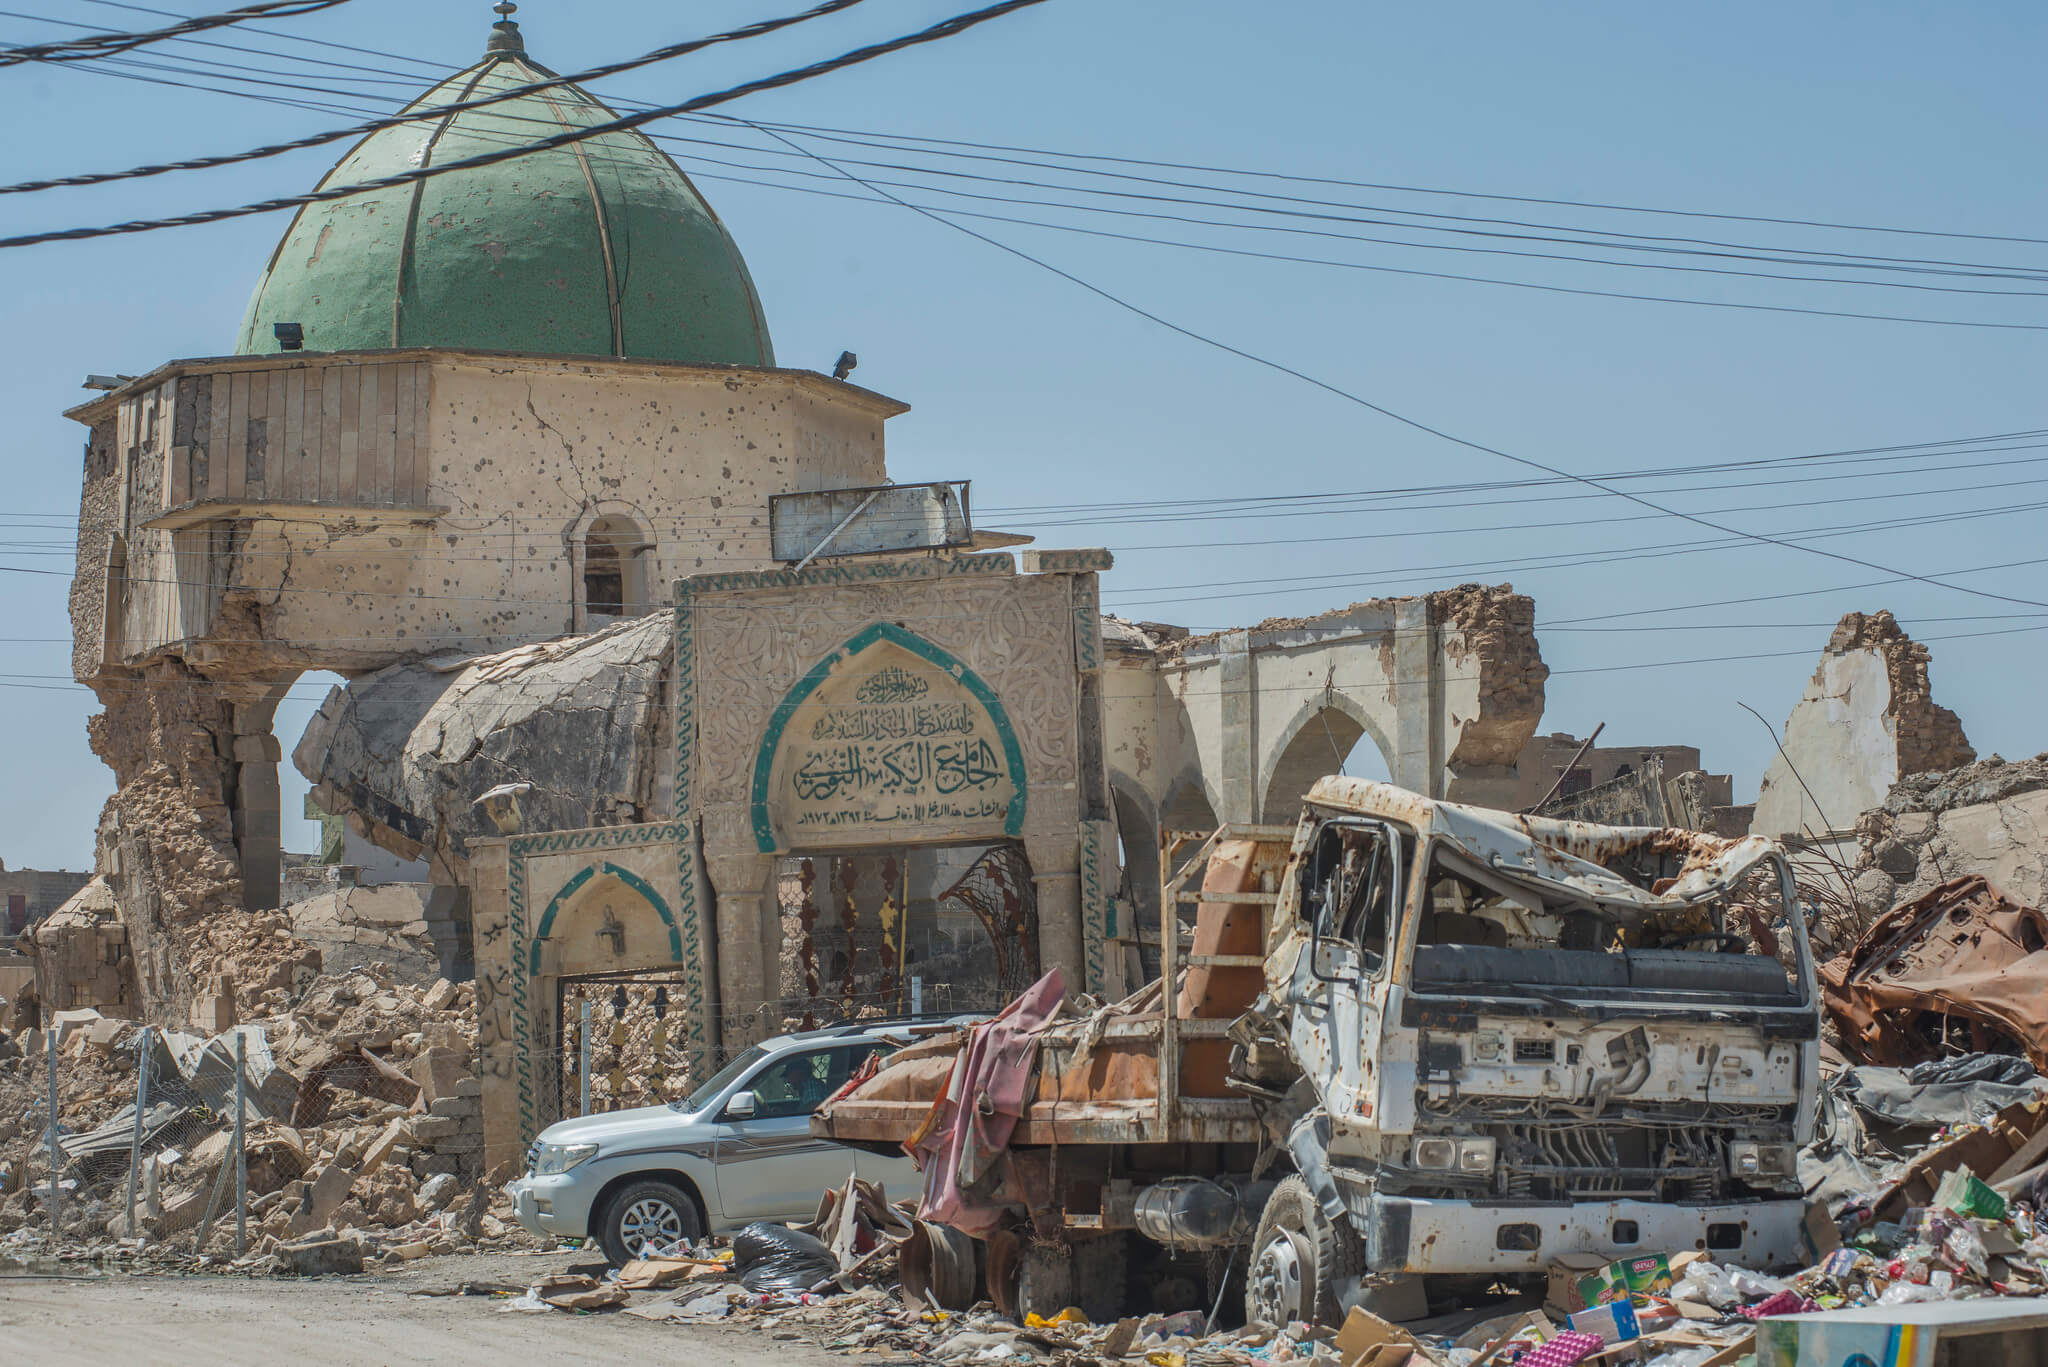 Ruins of the Great Mosque of al-Nuri in Mosul’s Old Town, which was ISIS’s last stronghold before they were forced from power in July 2017. Peter Biro, European Union / Flickr